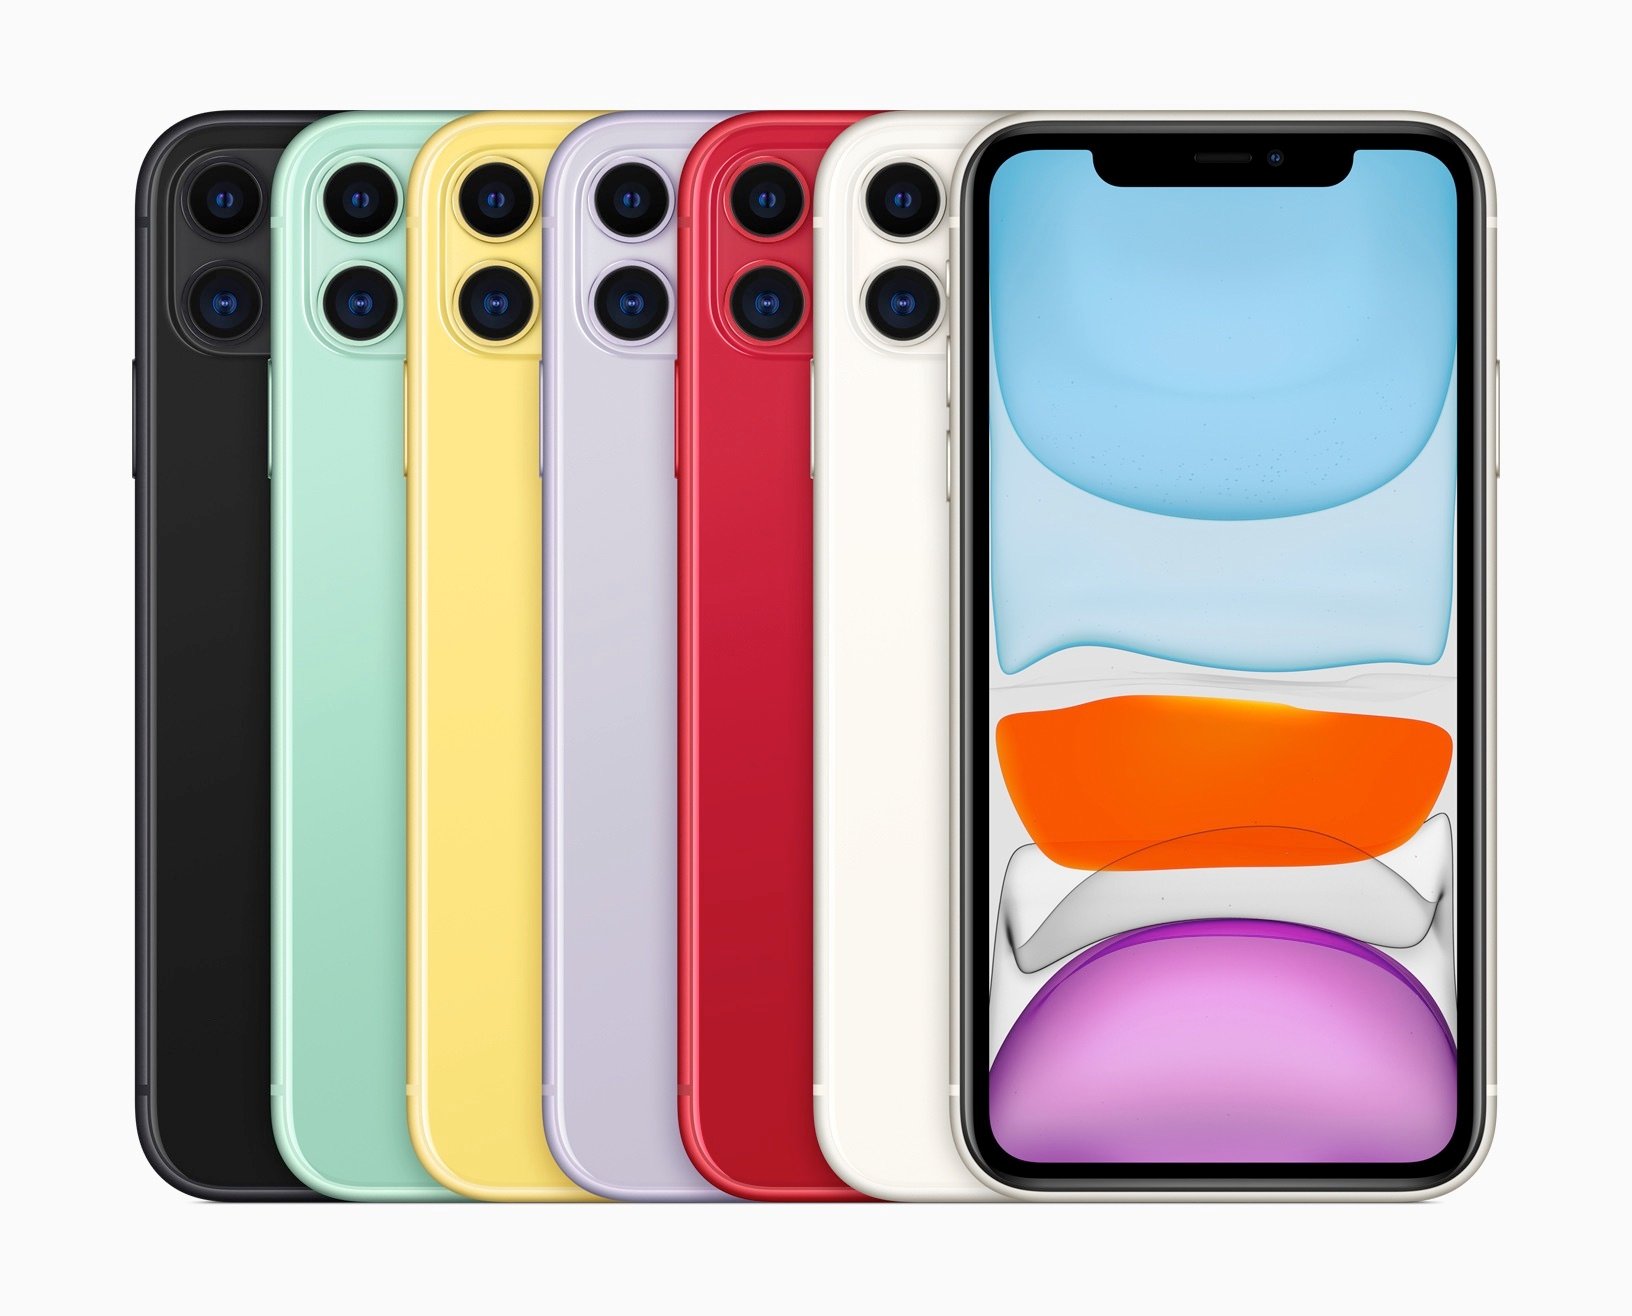 iPhone 11 featured